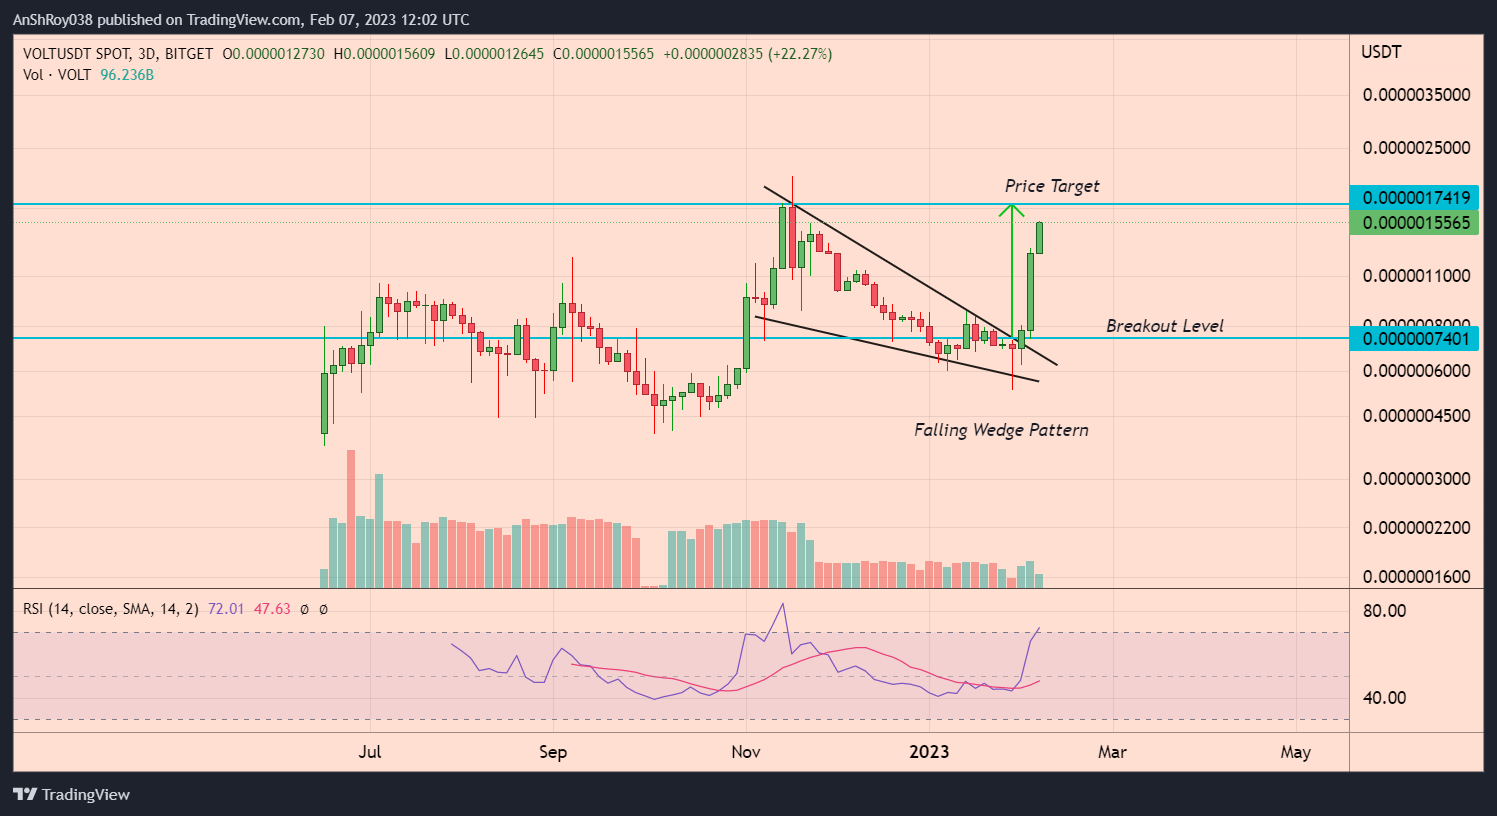 VOLT INU price confirmed a bullish wedge formation with a 135% price target